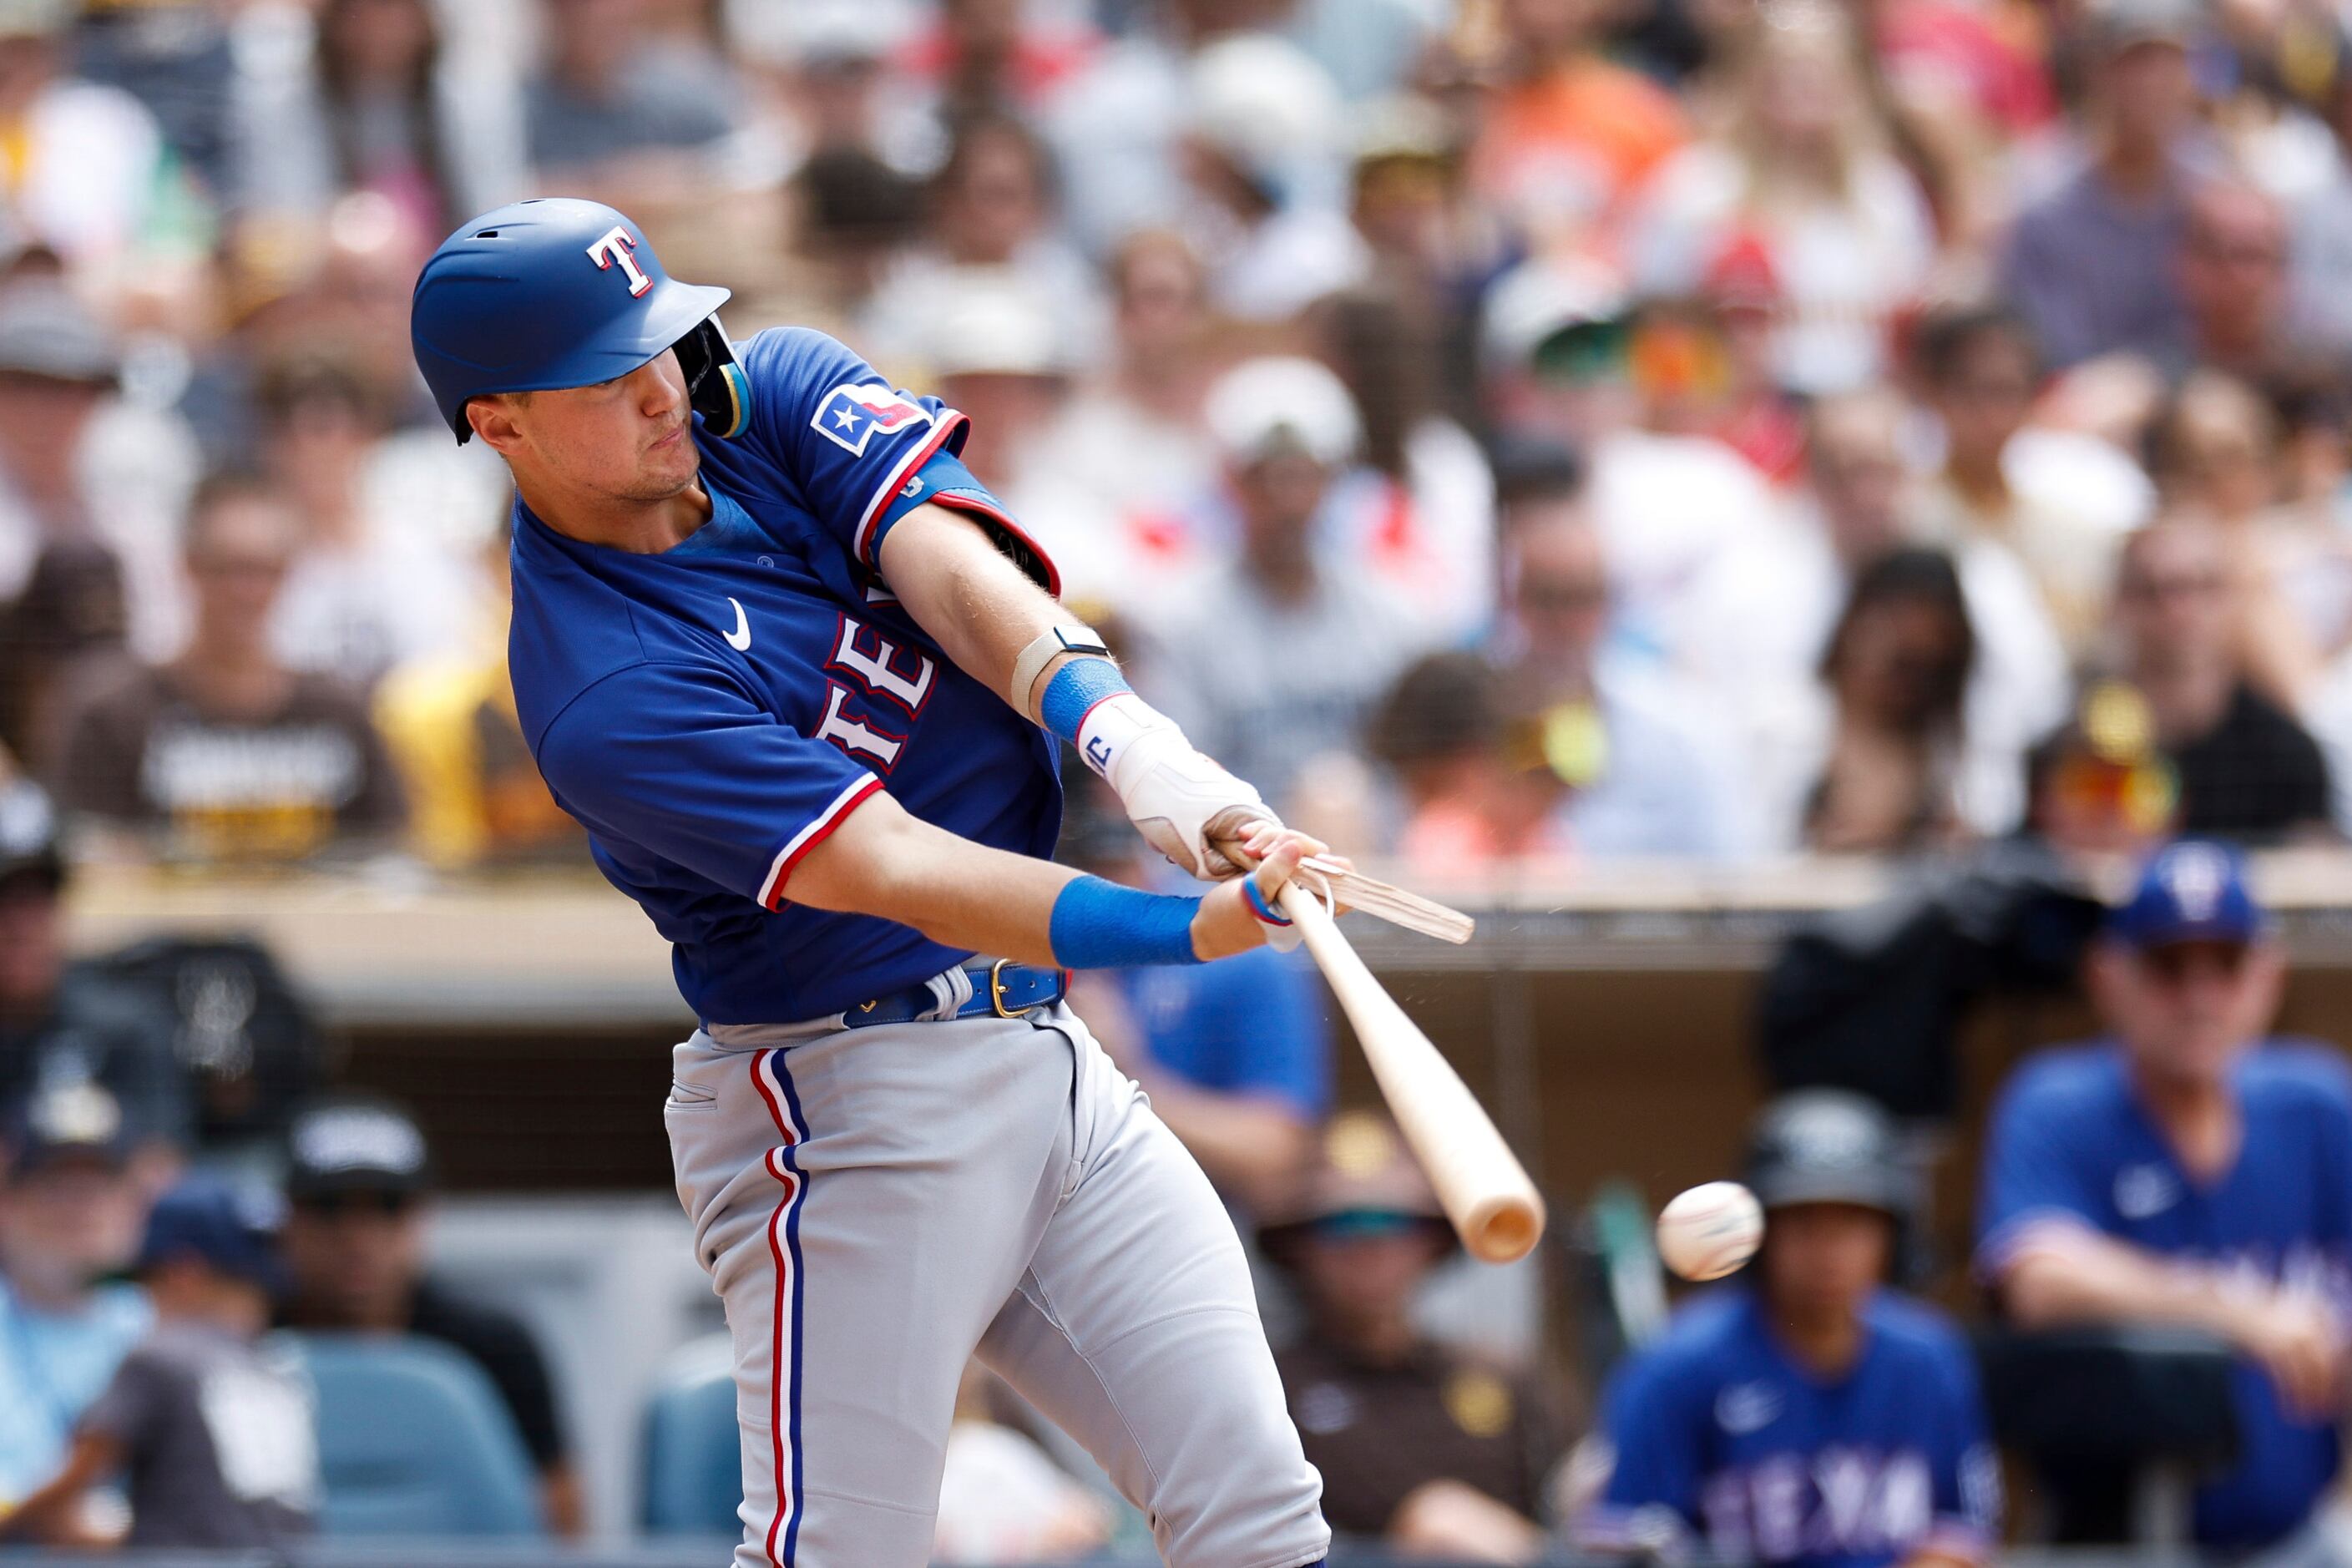 Rangers swept in San Diego, divisional lead over Astros back down